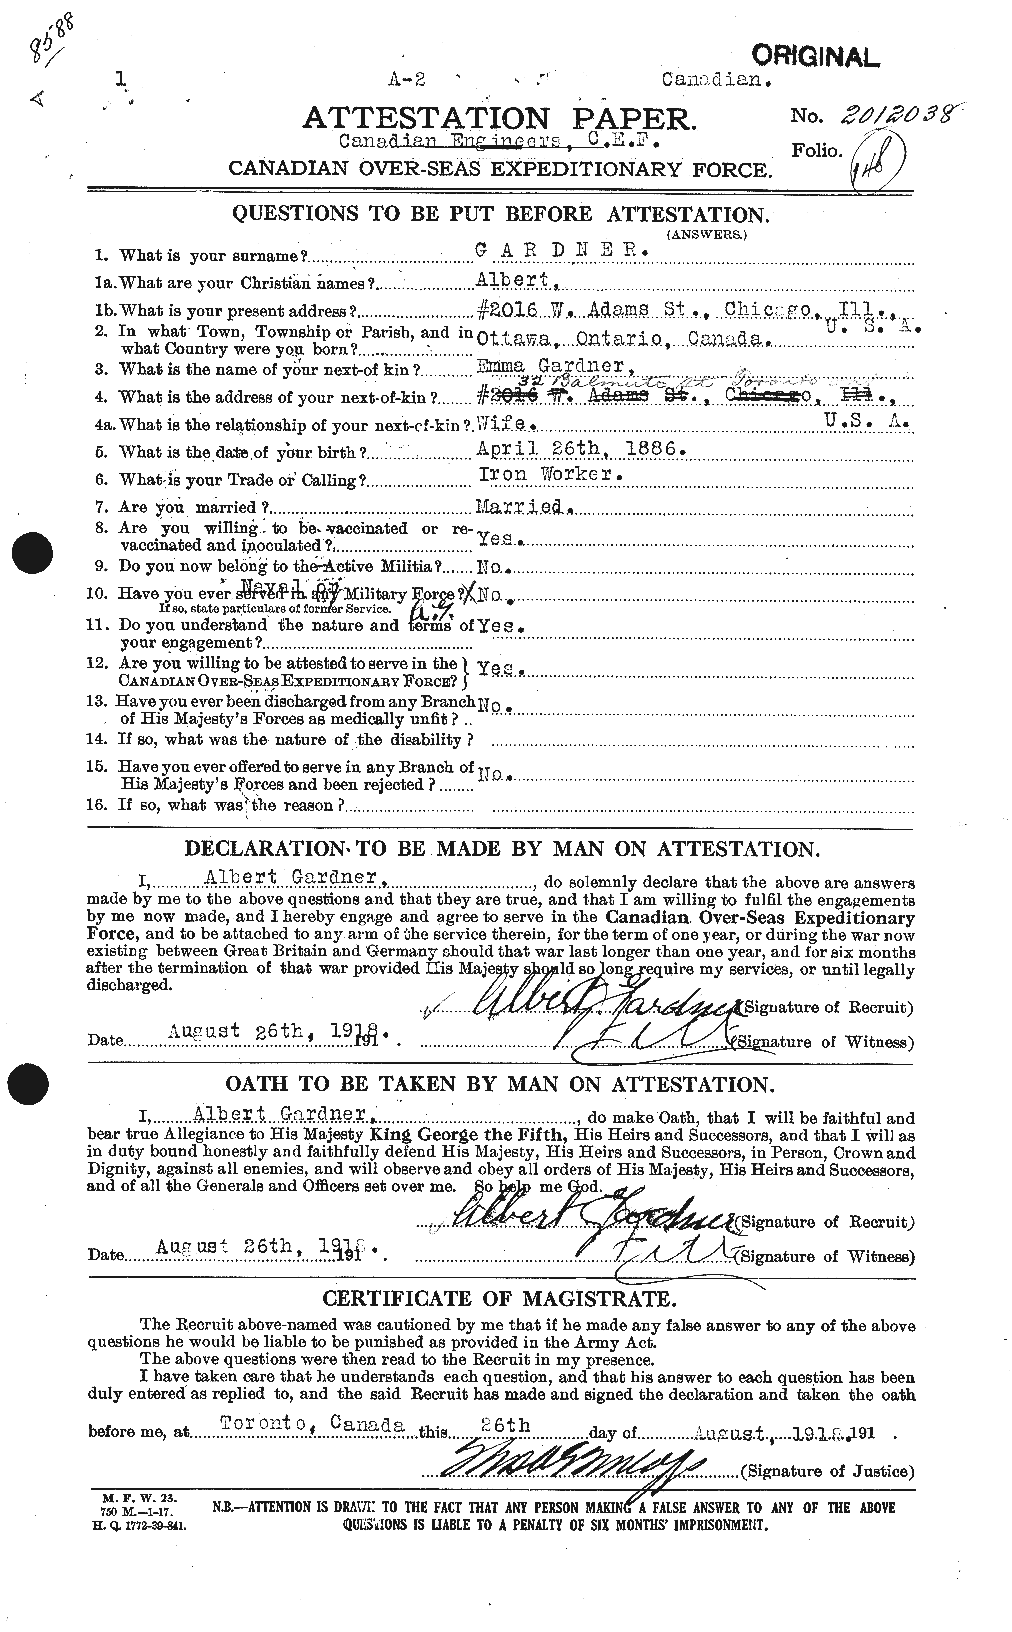 Personnel Records of the First World War - CEF 340930a